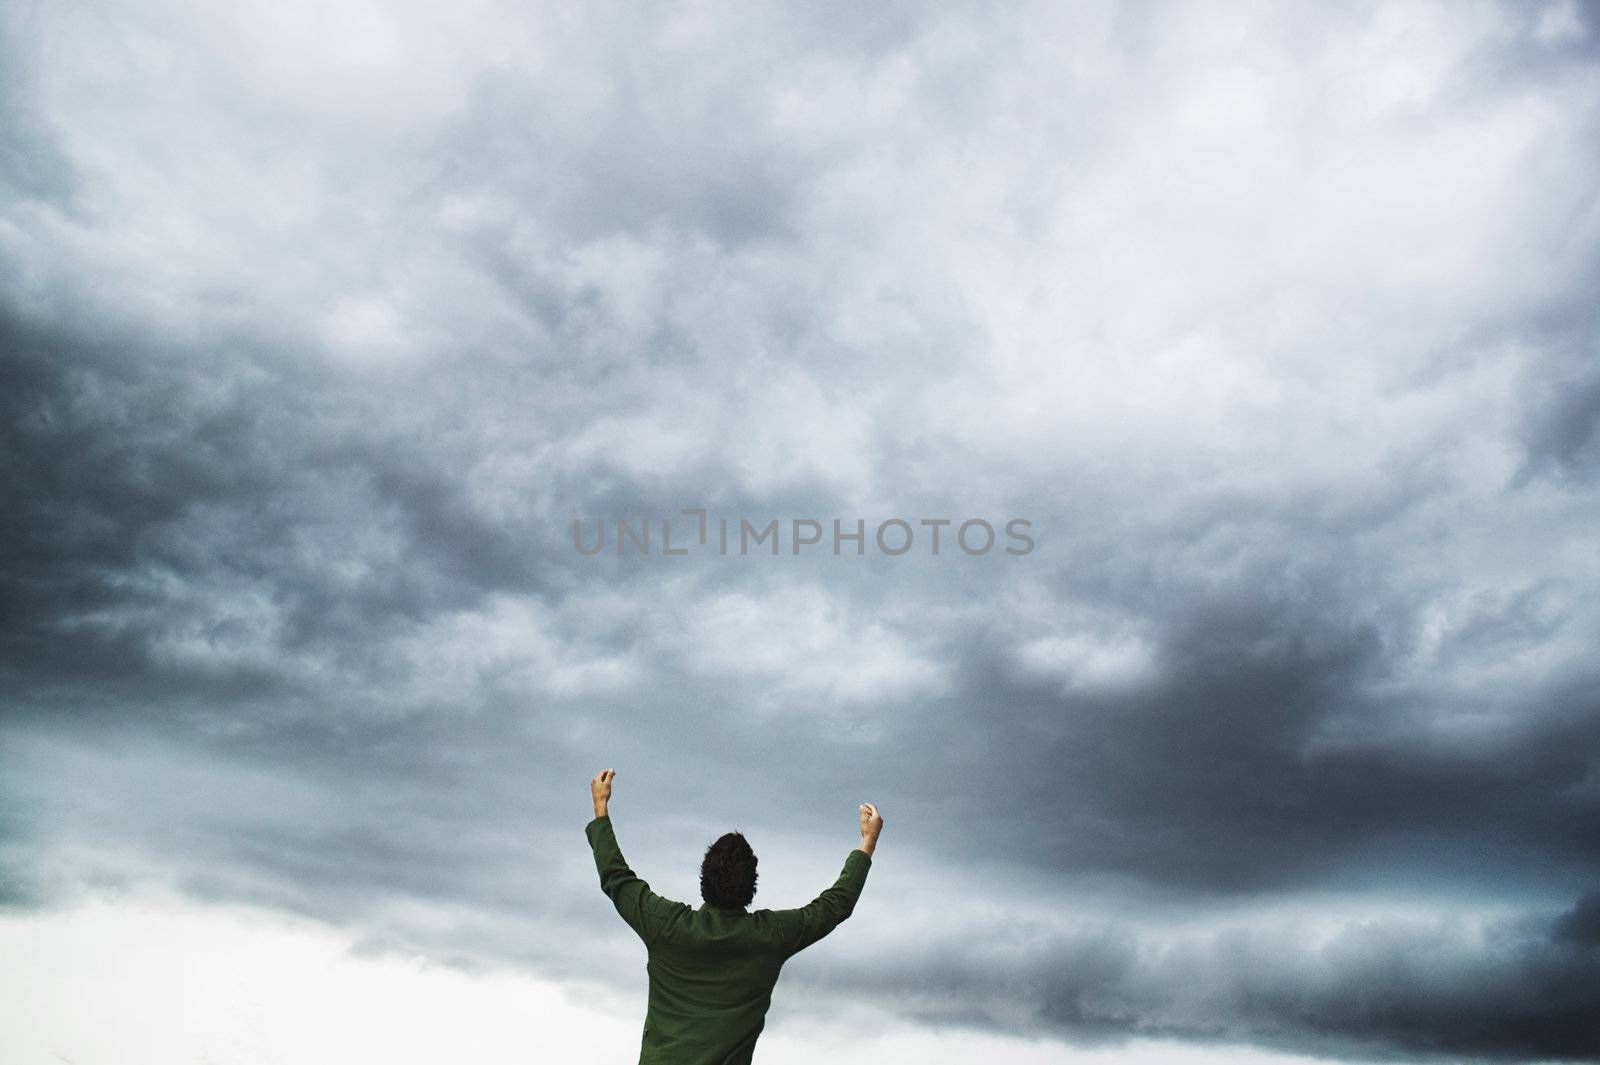 Man with Arms Raised with Cloudy Sky in Background by photo_guru